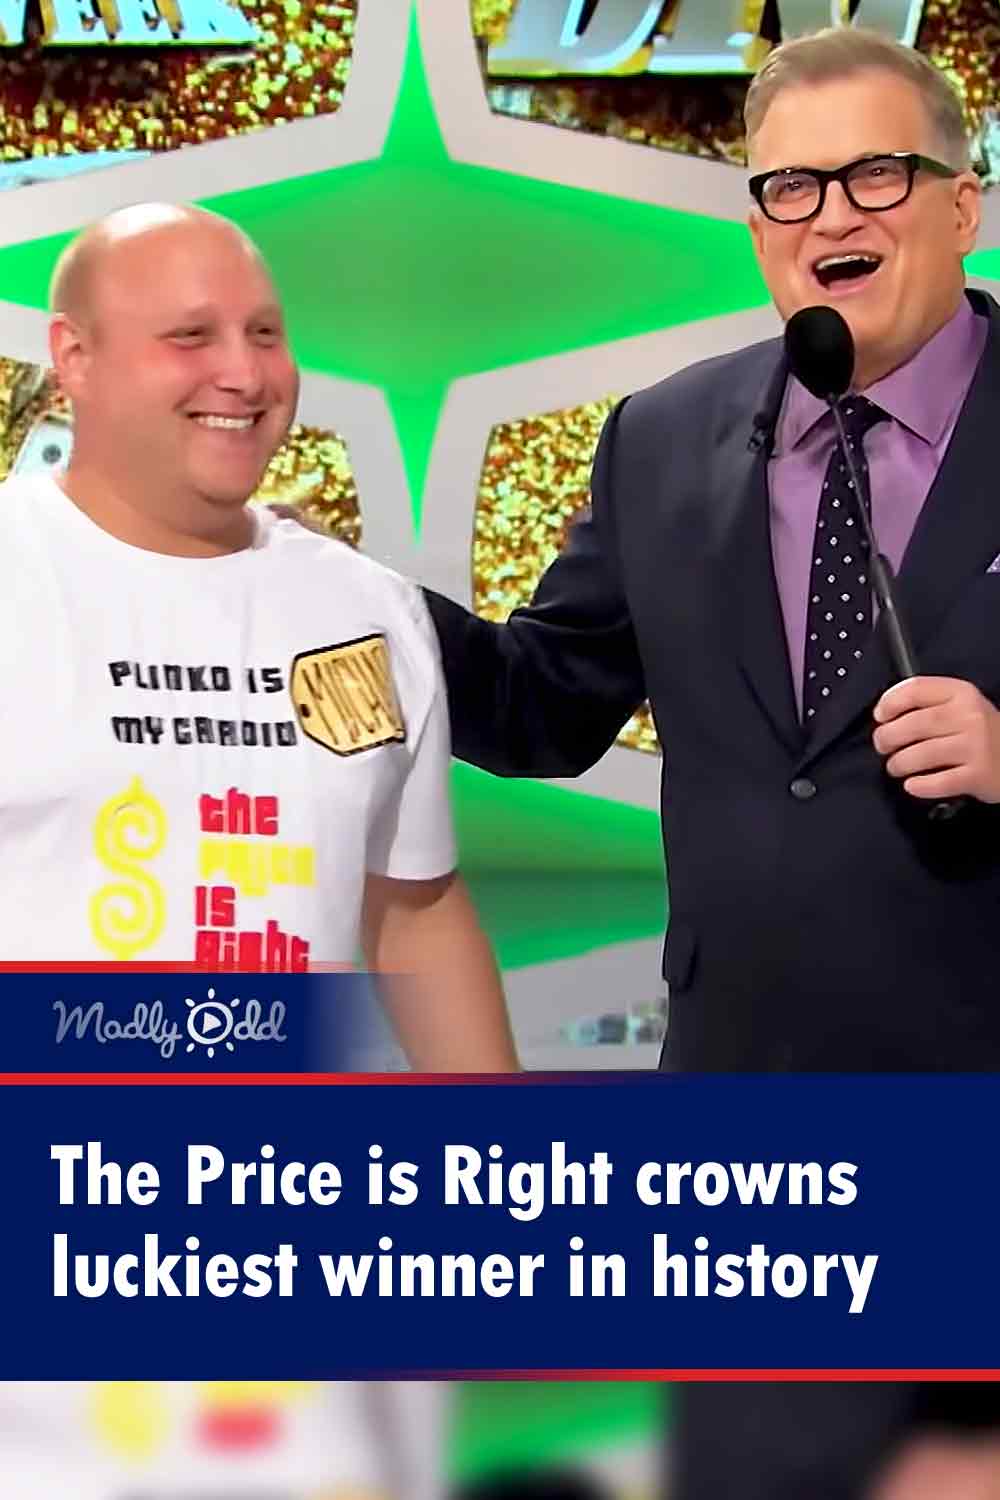 The Price is Right crowns luckiest winner in history